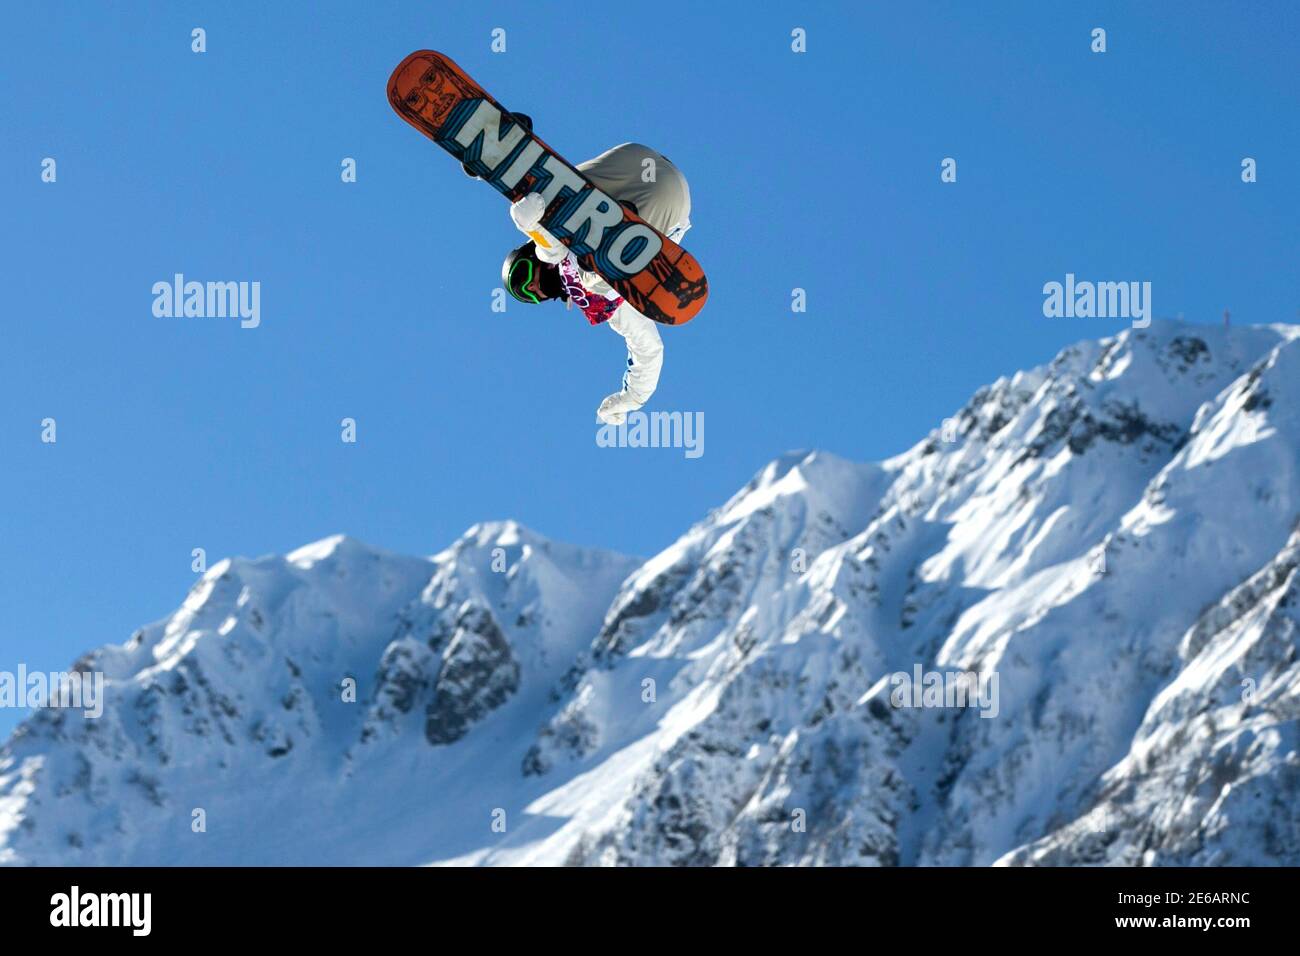 Getand Daar onderdak Swedish snowboarder Sven Thorgren flips inverted as he goes over a jump  during snowboard slopestyle training at the 2014 Sochi Winter Olympics in  Rosa Khutor, February 4, 2014. REUTERS/Lucas Jackson (RUSSIA -